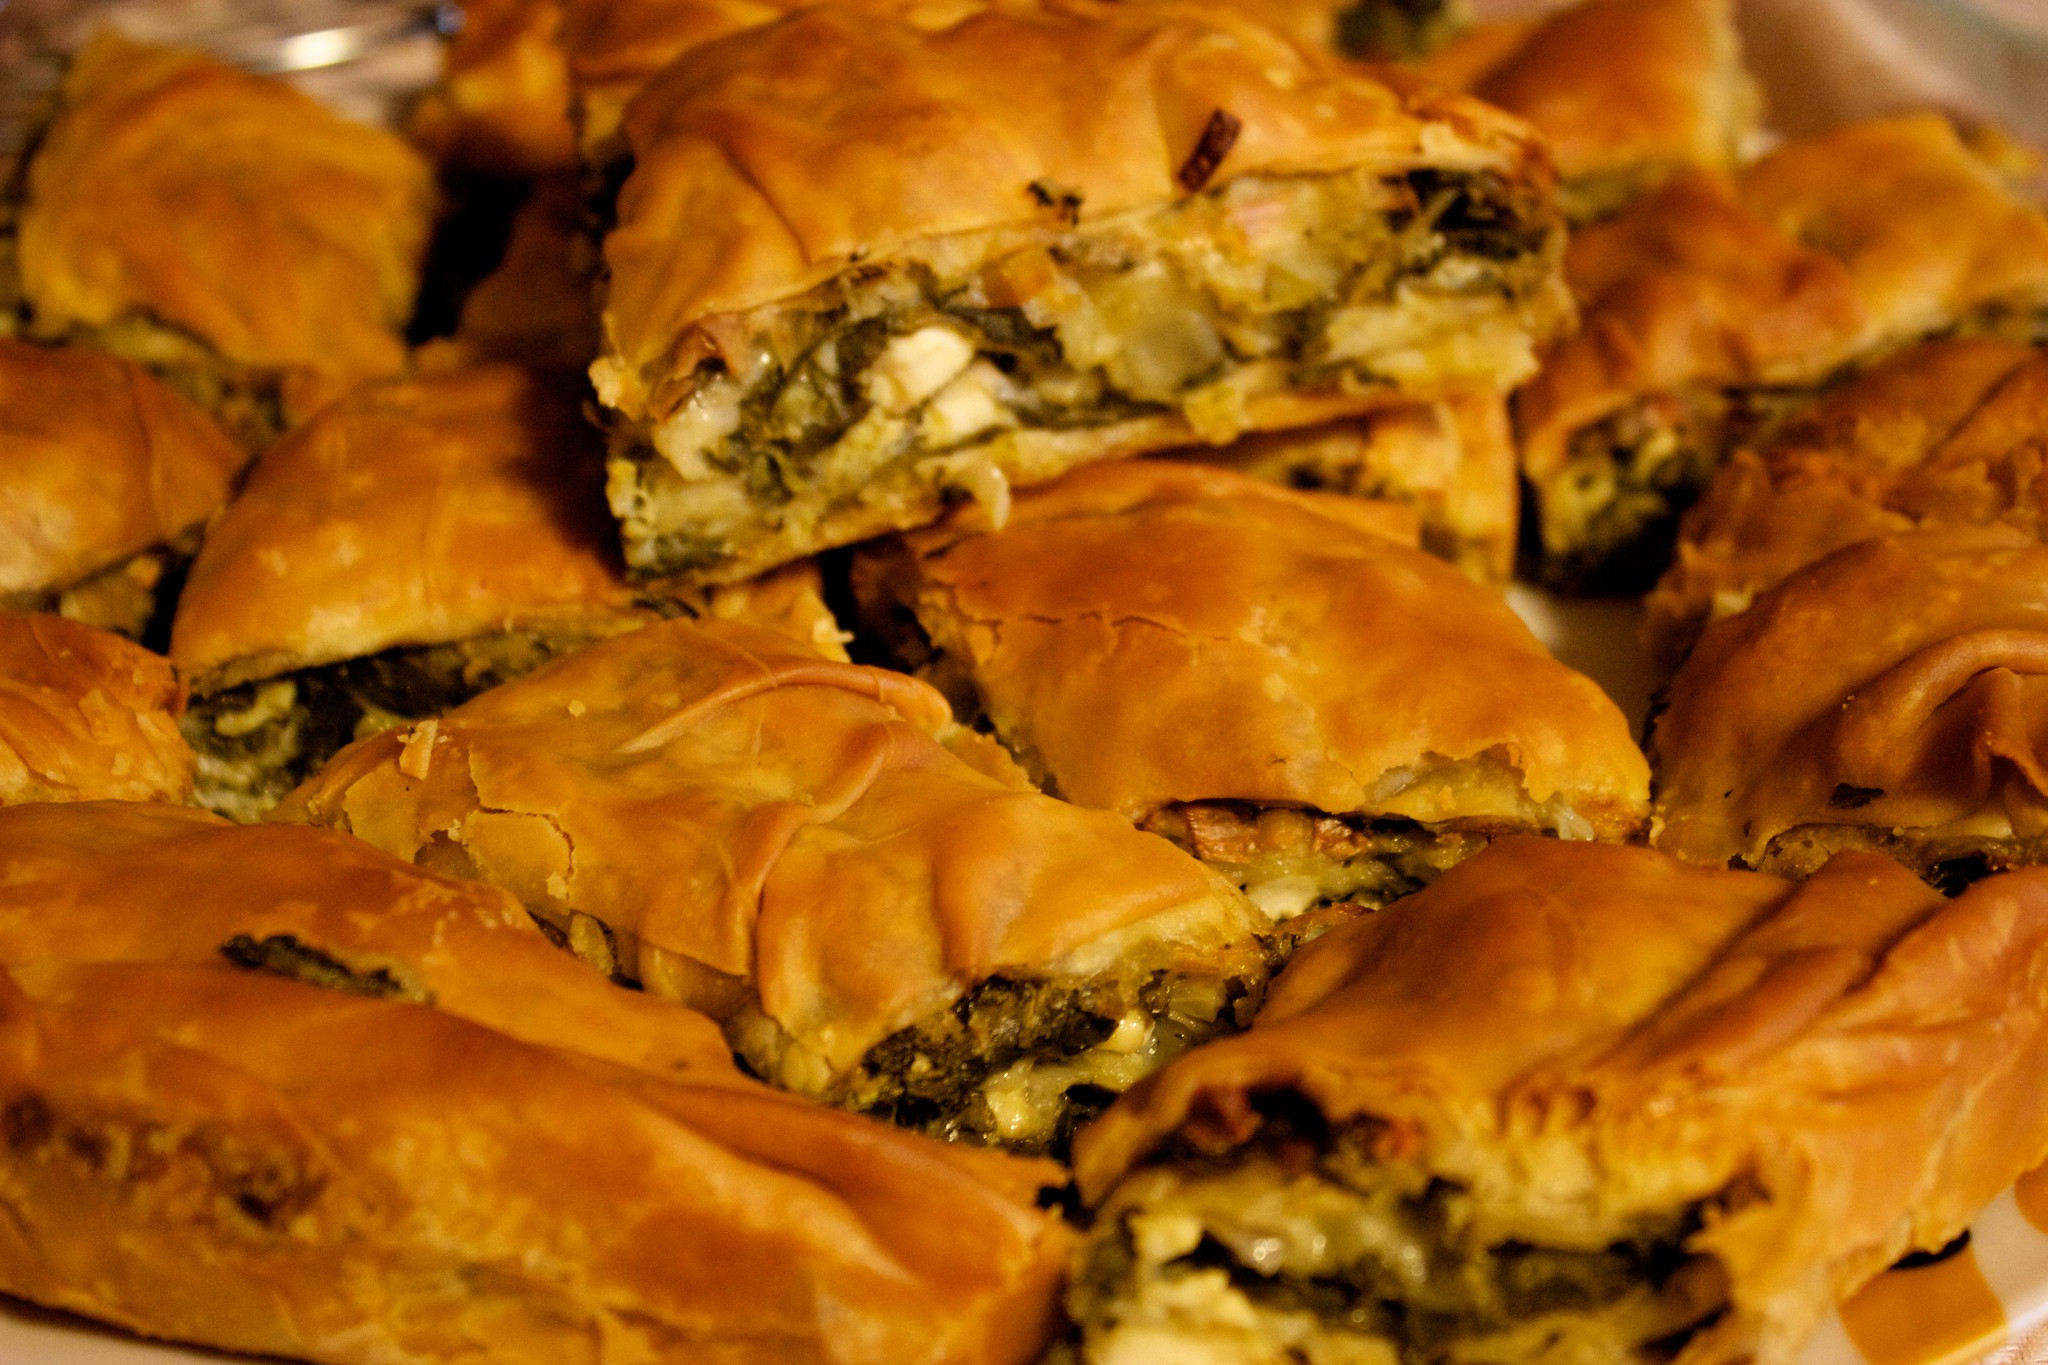 Spinach Pie by Alexander Baxevanis on Flickr